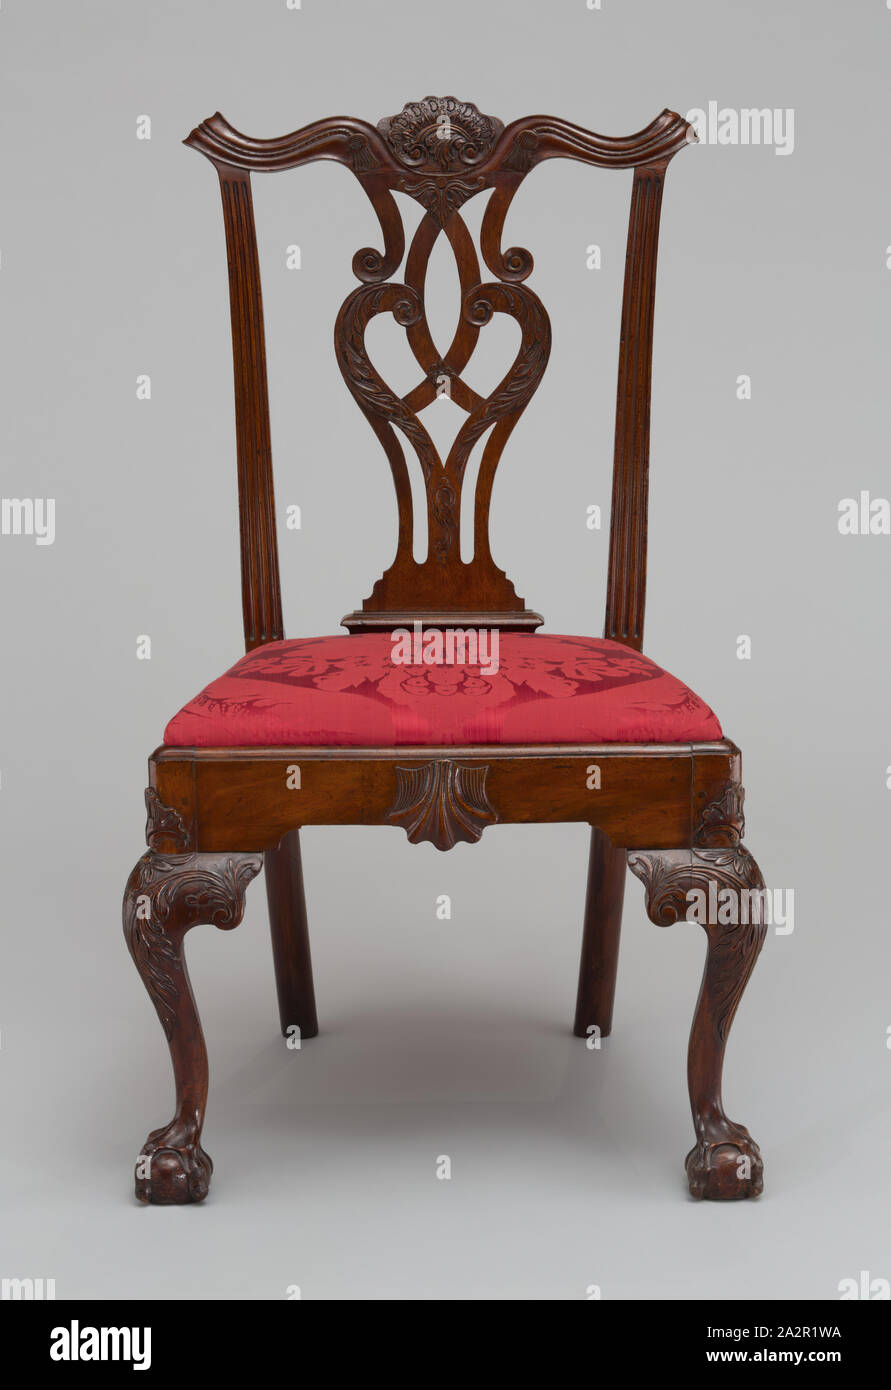 Unknown (American), Chair, between 1760 and 1790, mahogany, Overall: 40 × 23 1/2 × 21 1/2 inches (101.6 × 59.7 × 54.6 cm Stock Photo